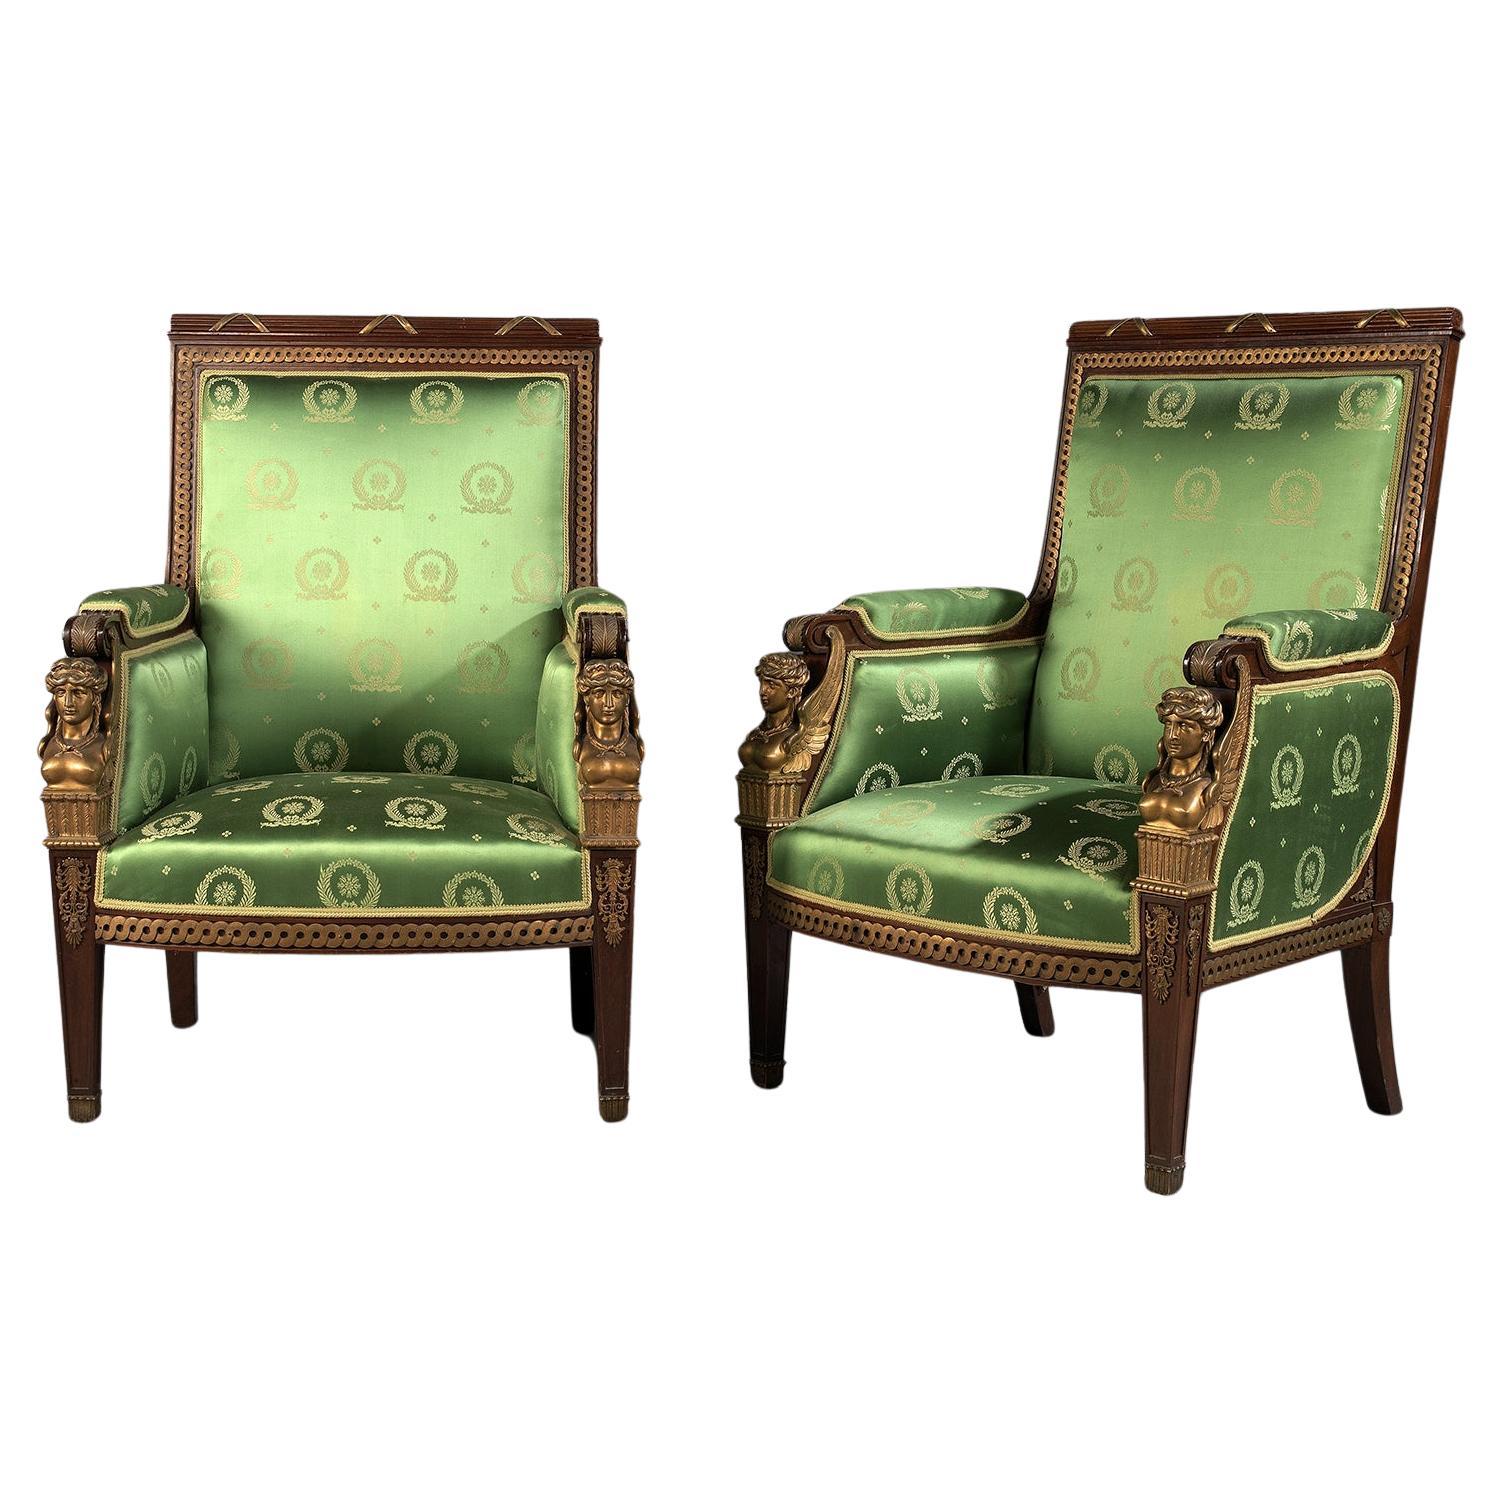 A  Pair of Empire Style Bergères in the Manner of Jacob-Desmalter For Sale